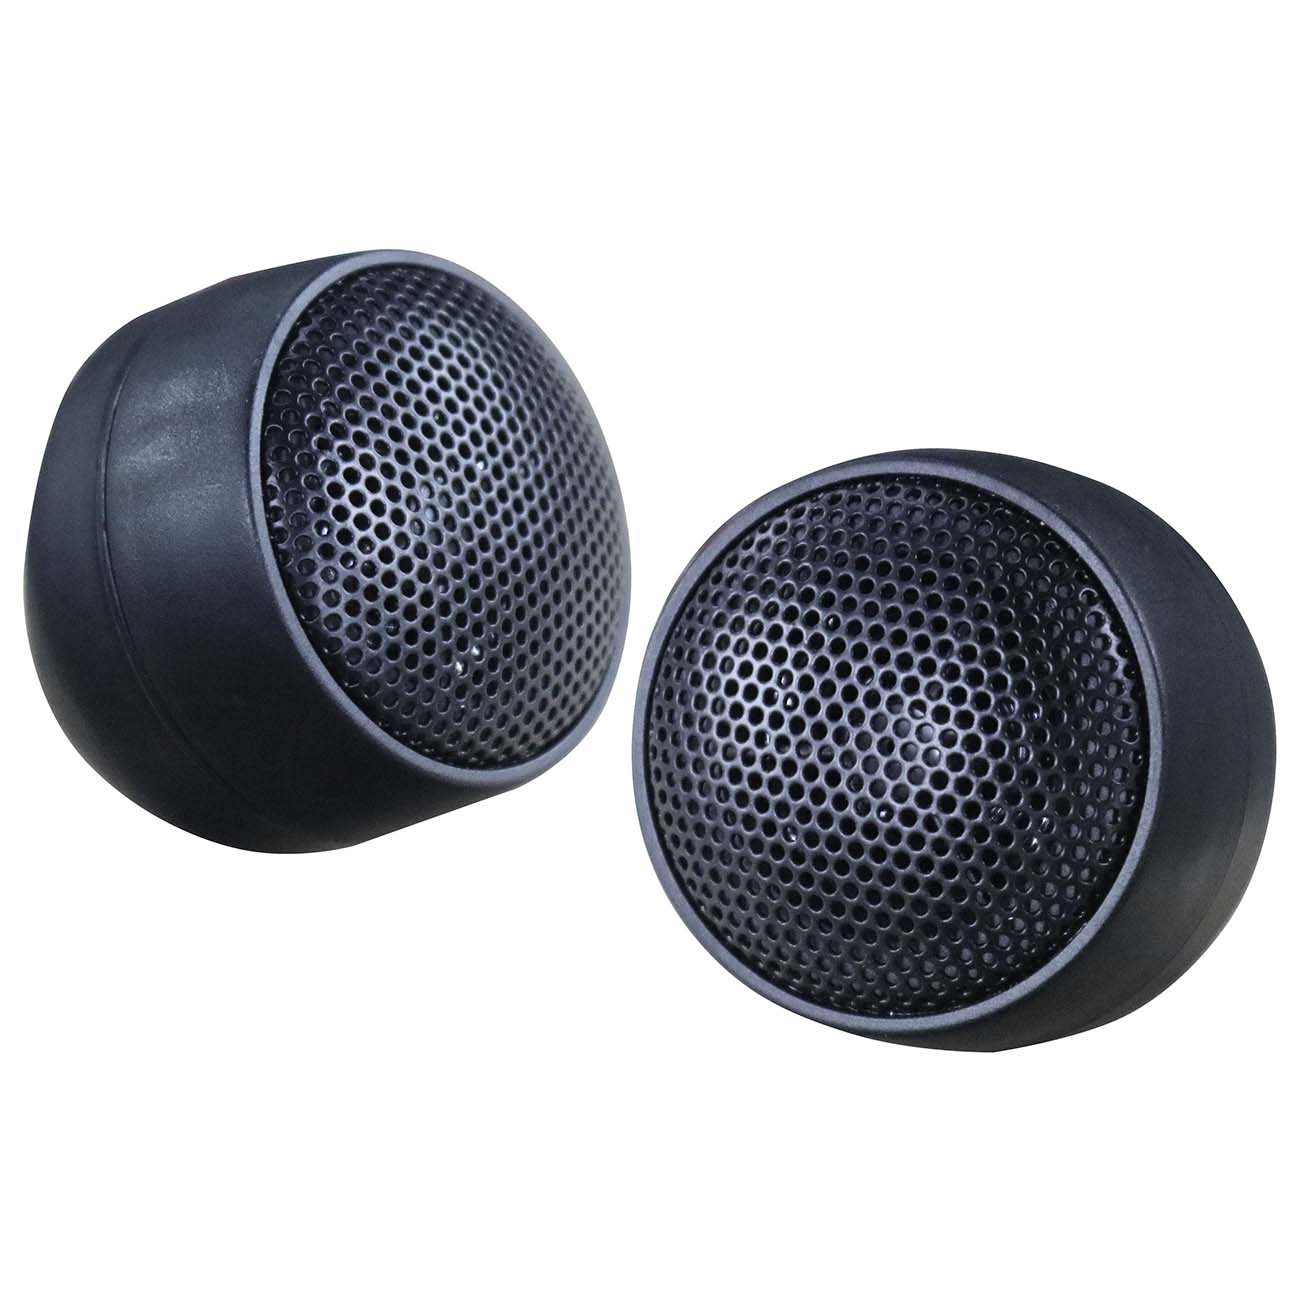 Audiopipe NTC2200 1.75″ Dome Tweeter 250W Max (Sold In Pairs)